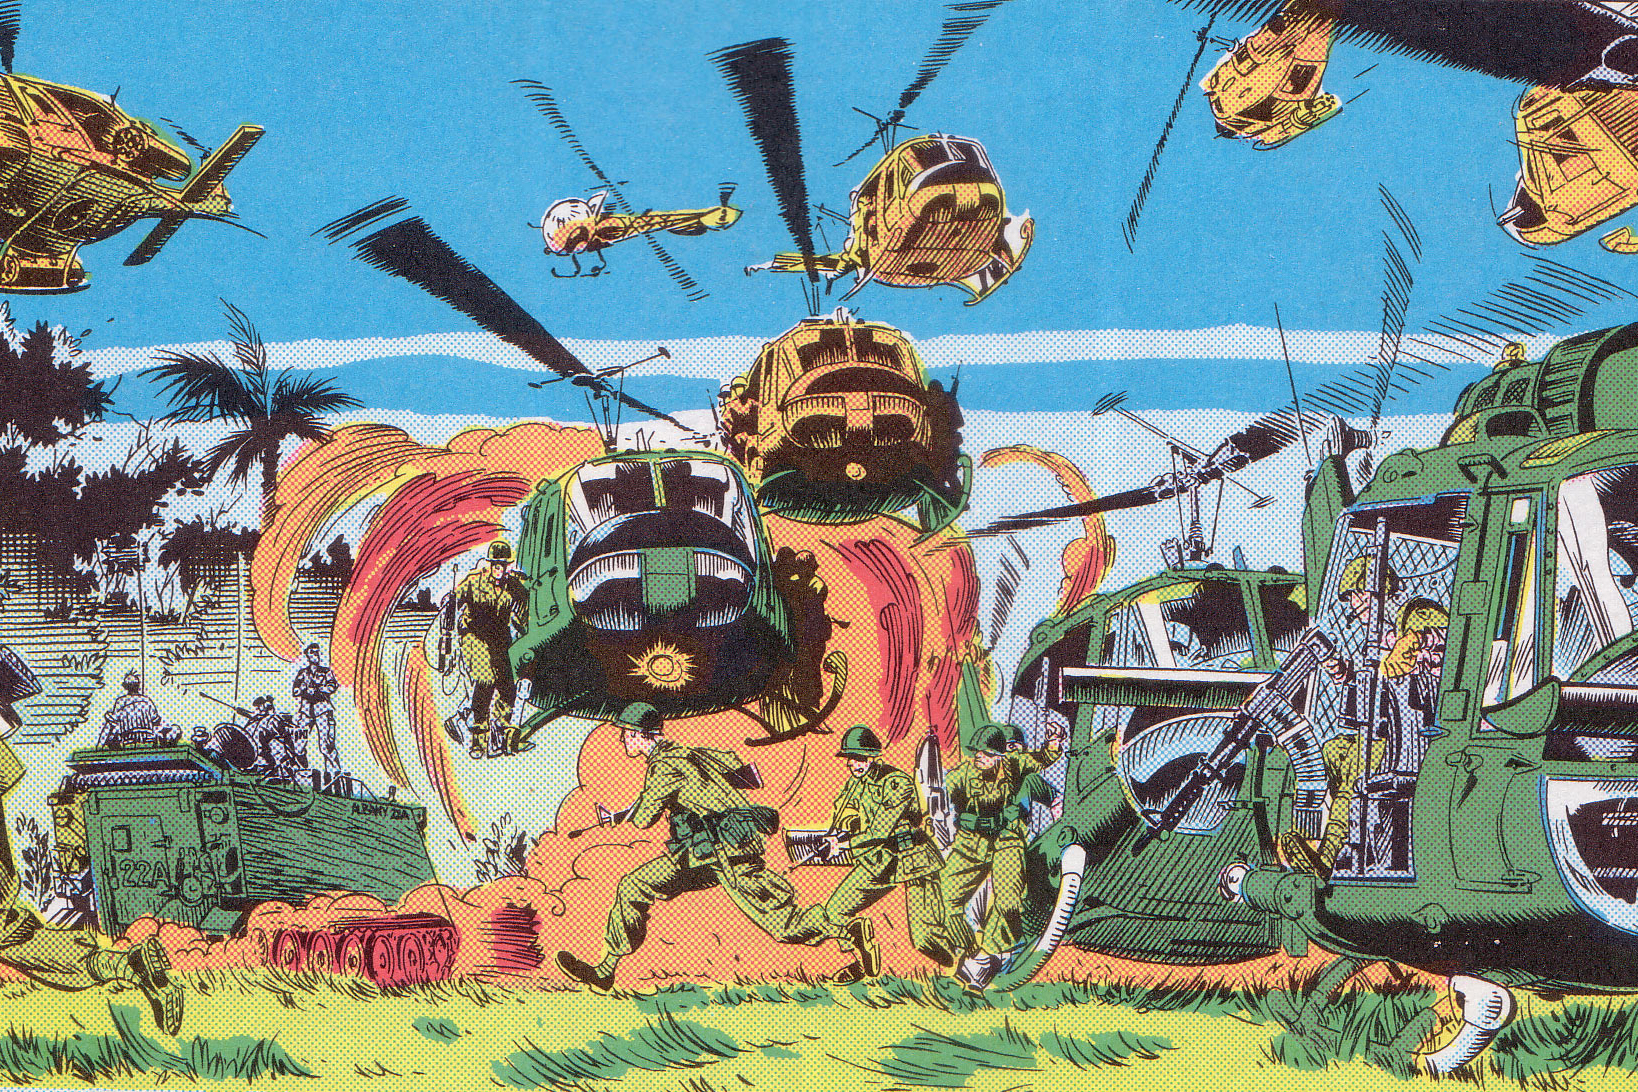 A Panel from the Marvel Comics series ‘The ’Nam.’